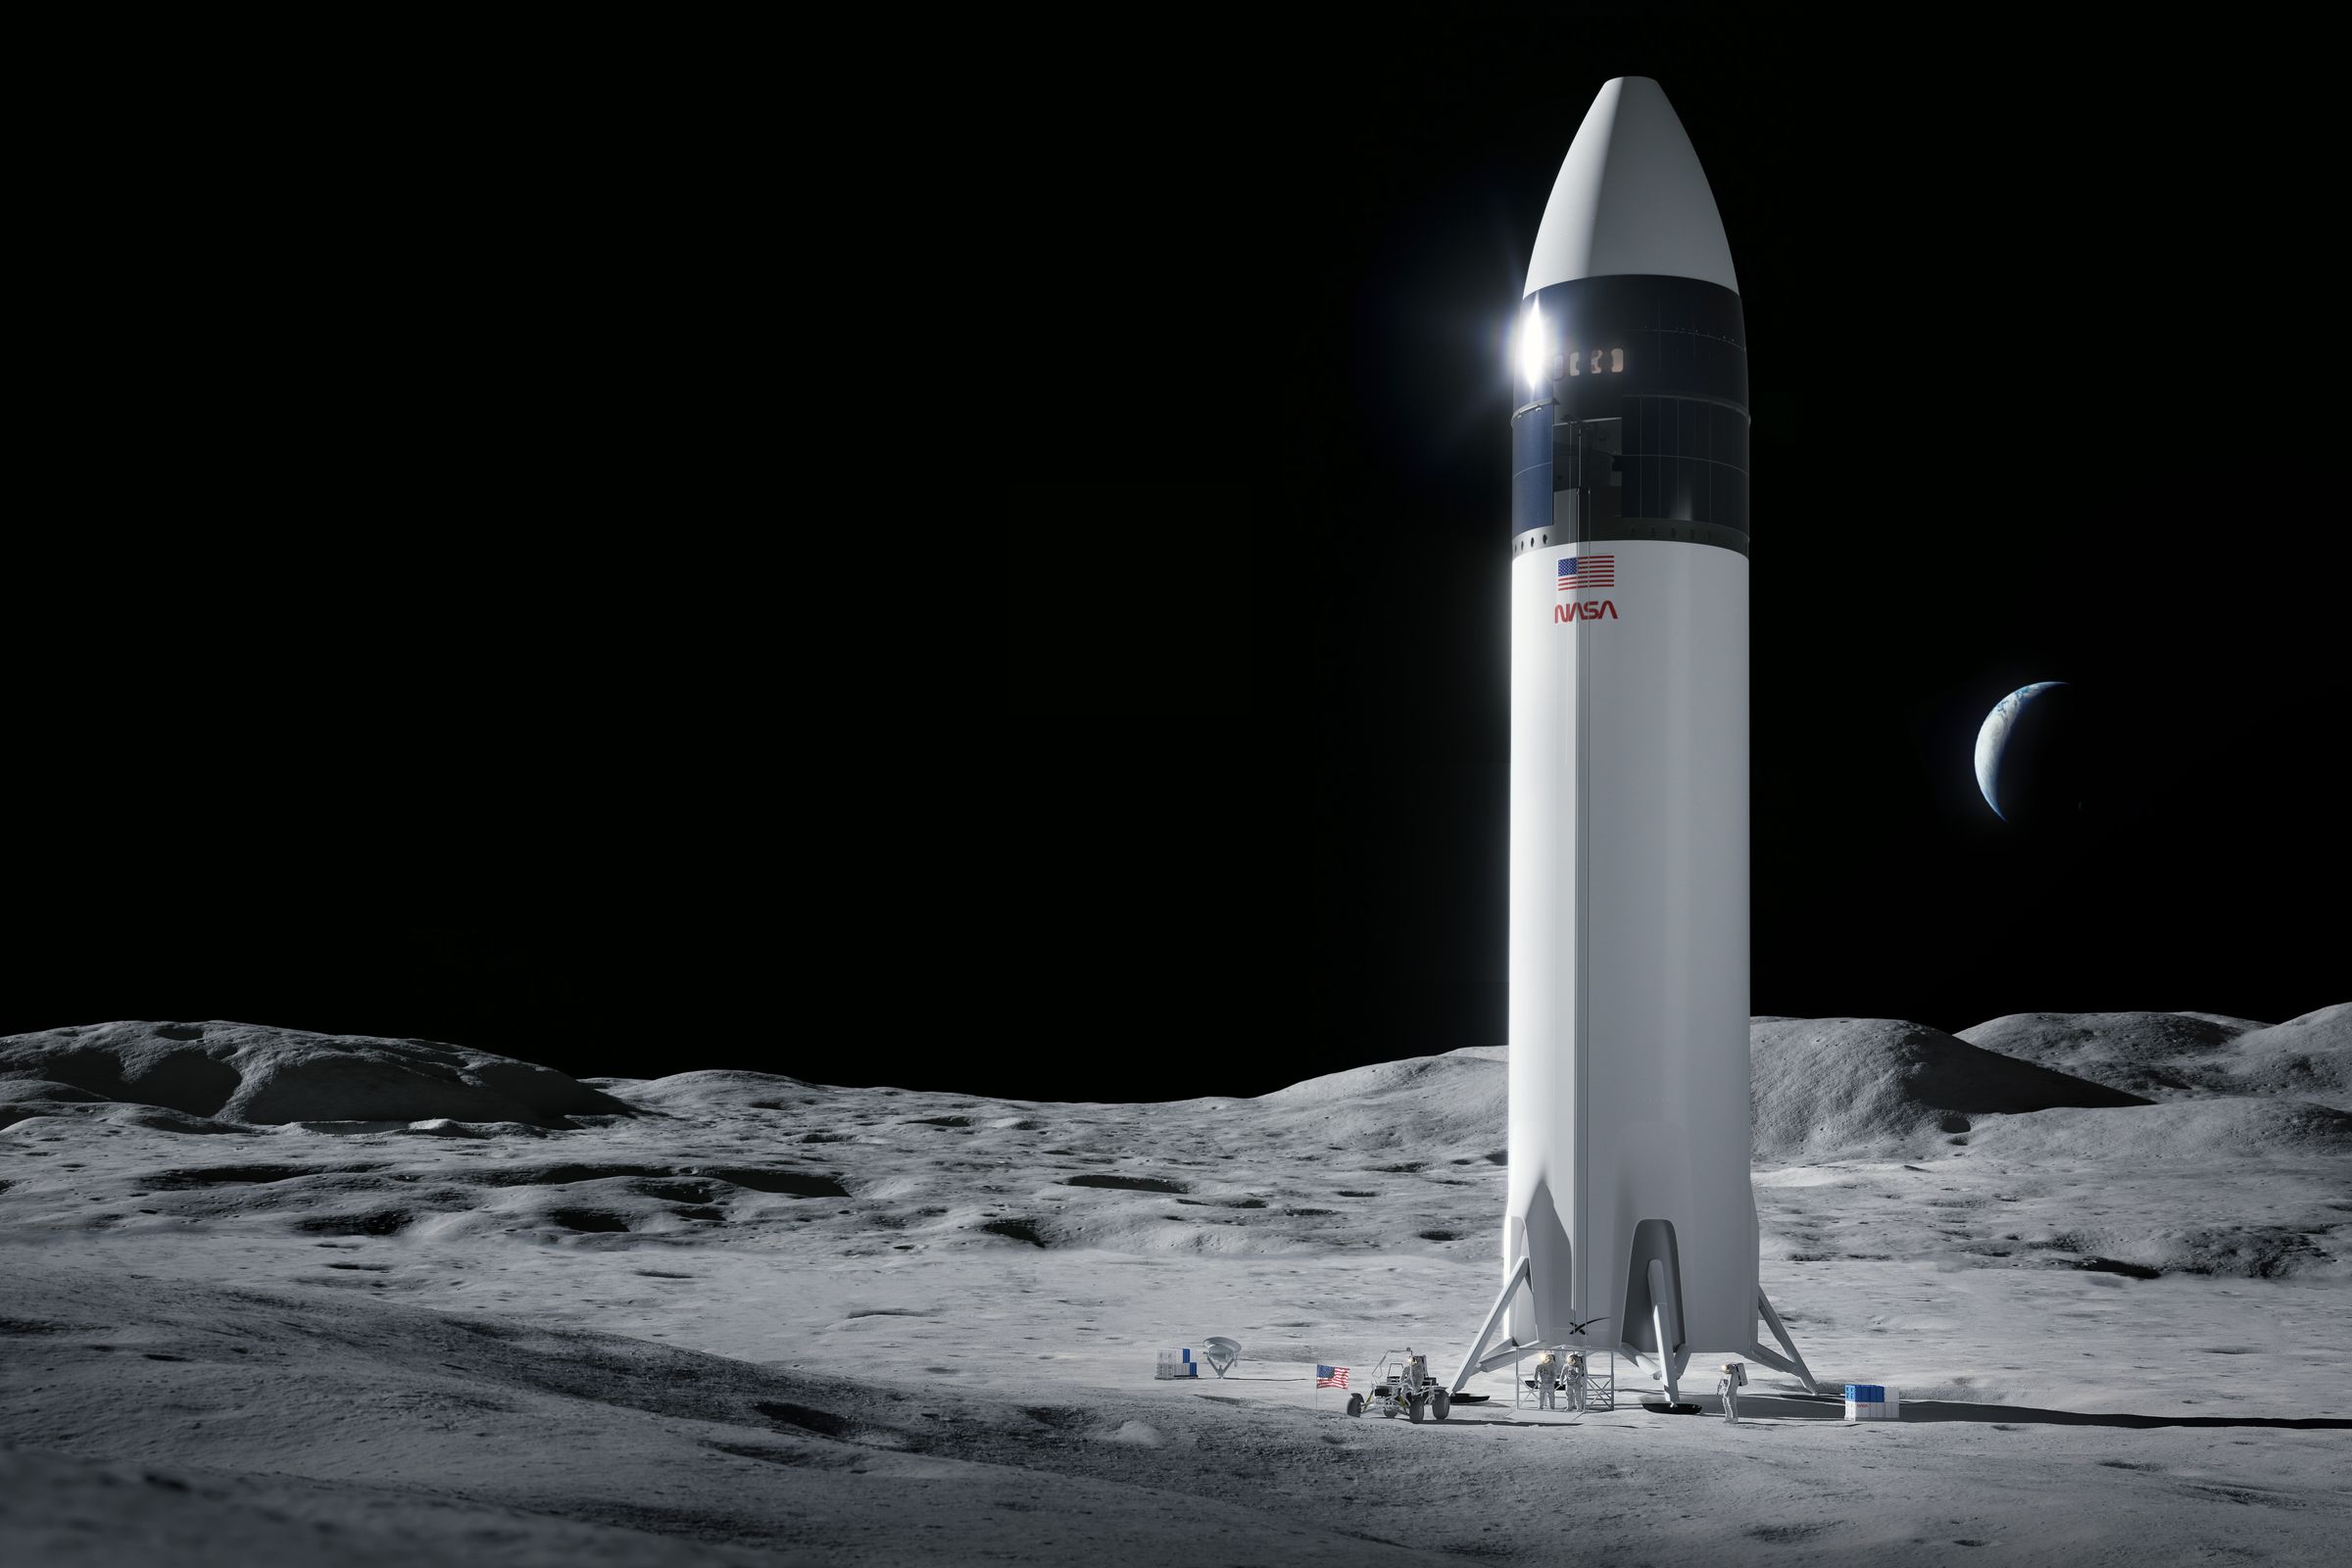 An artistic rendering of SpaceX’s Starship lunar lander, developed in partnership with NASA, on the surface of the Moon